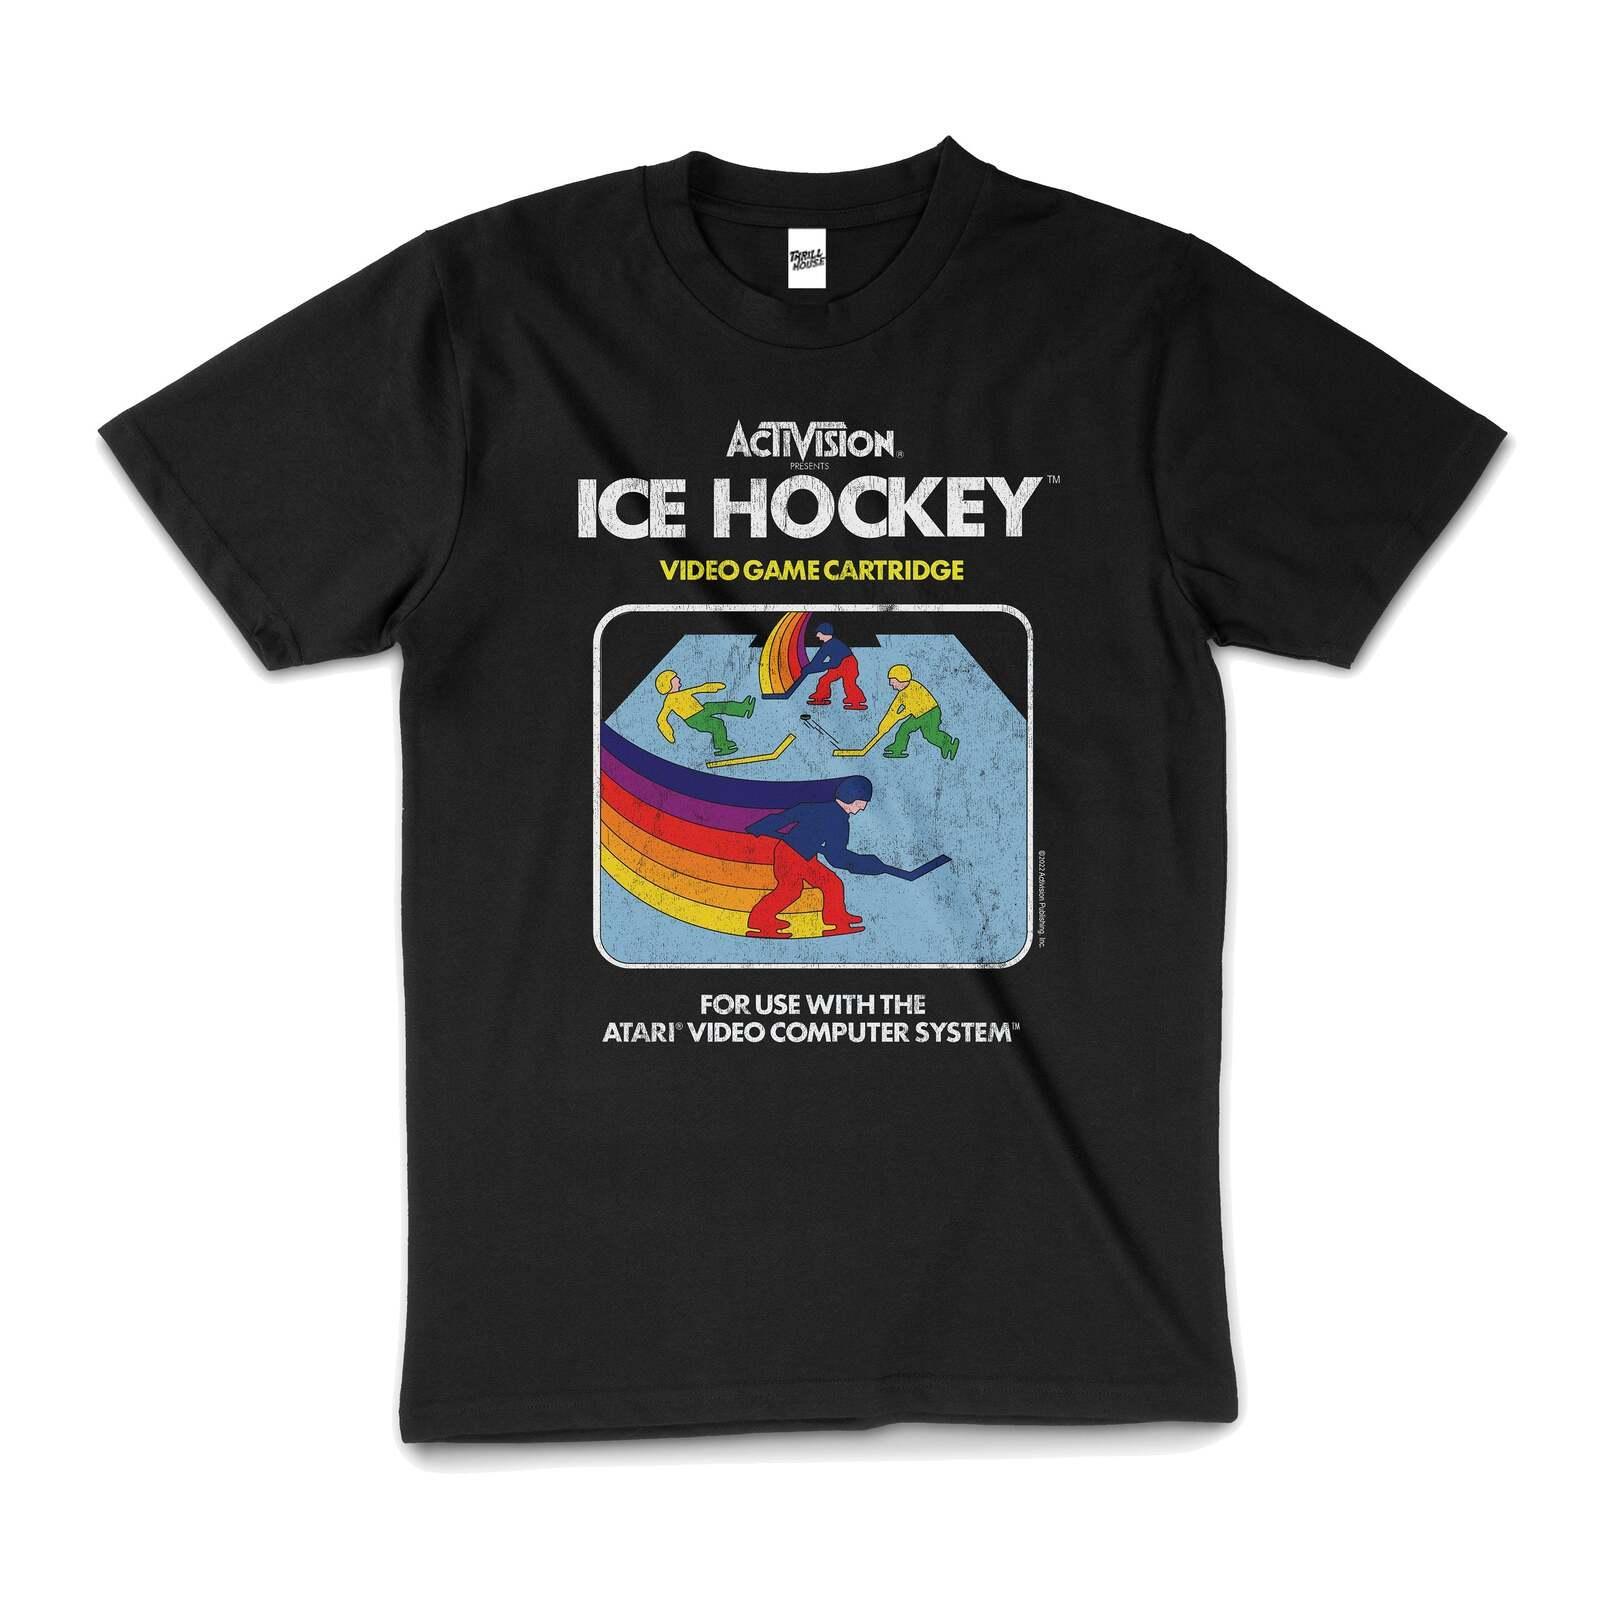 Activision Ice Hockey 80s Video Game Cotton T-Shirt Unisex Tee Black